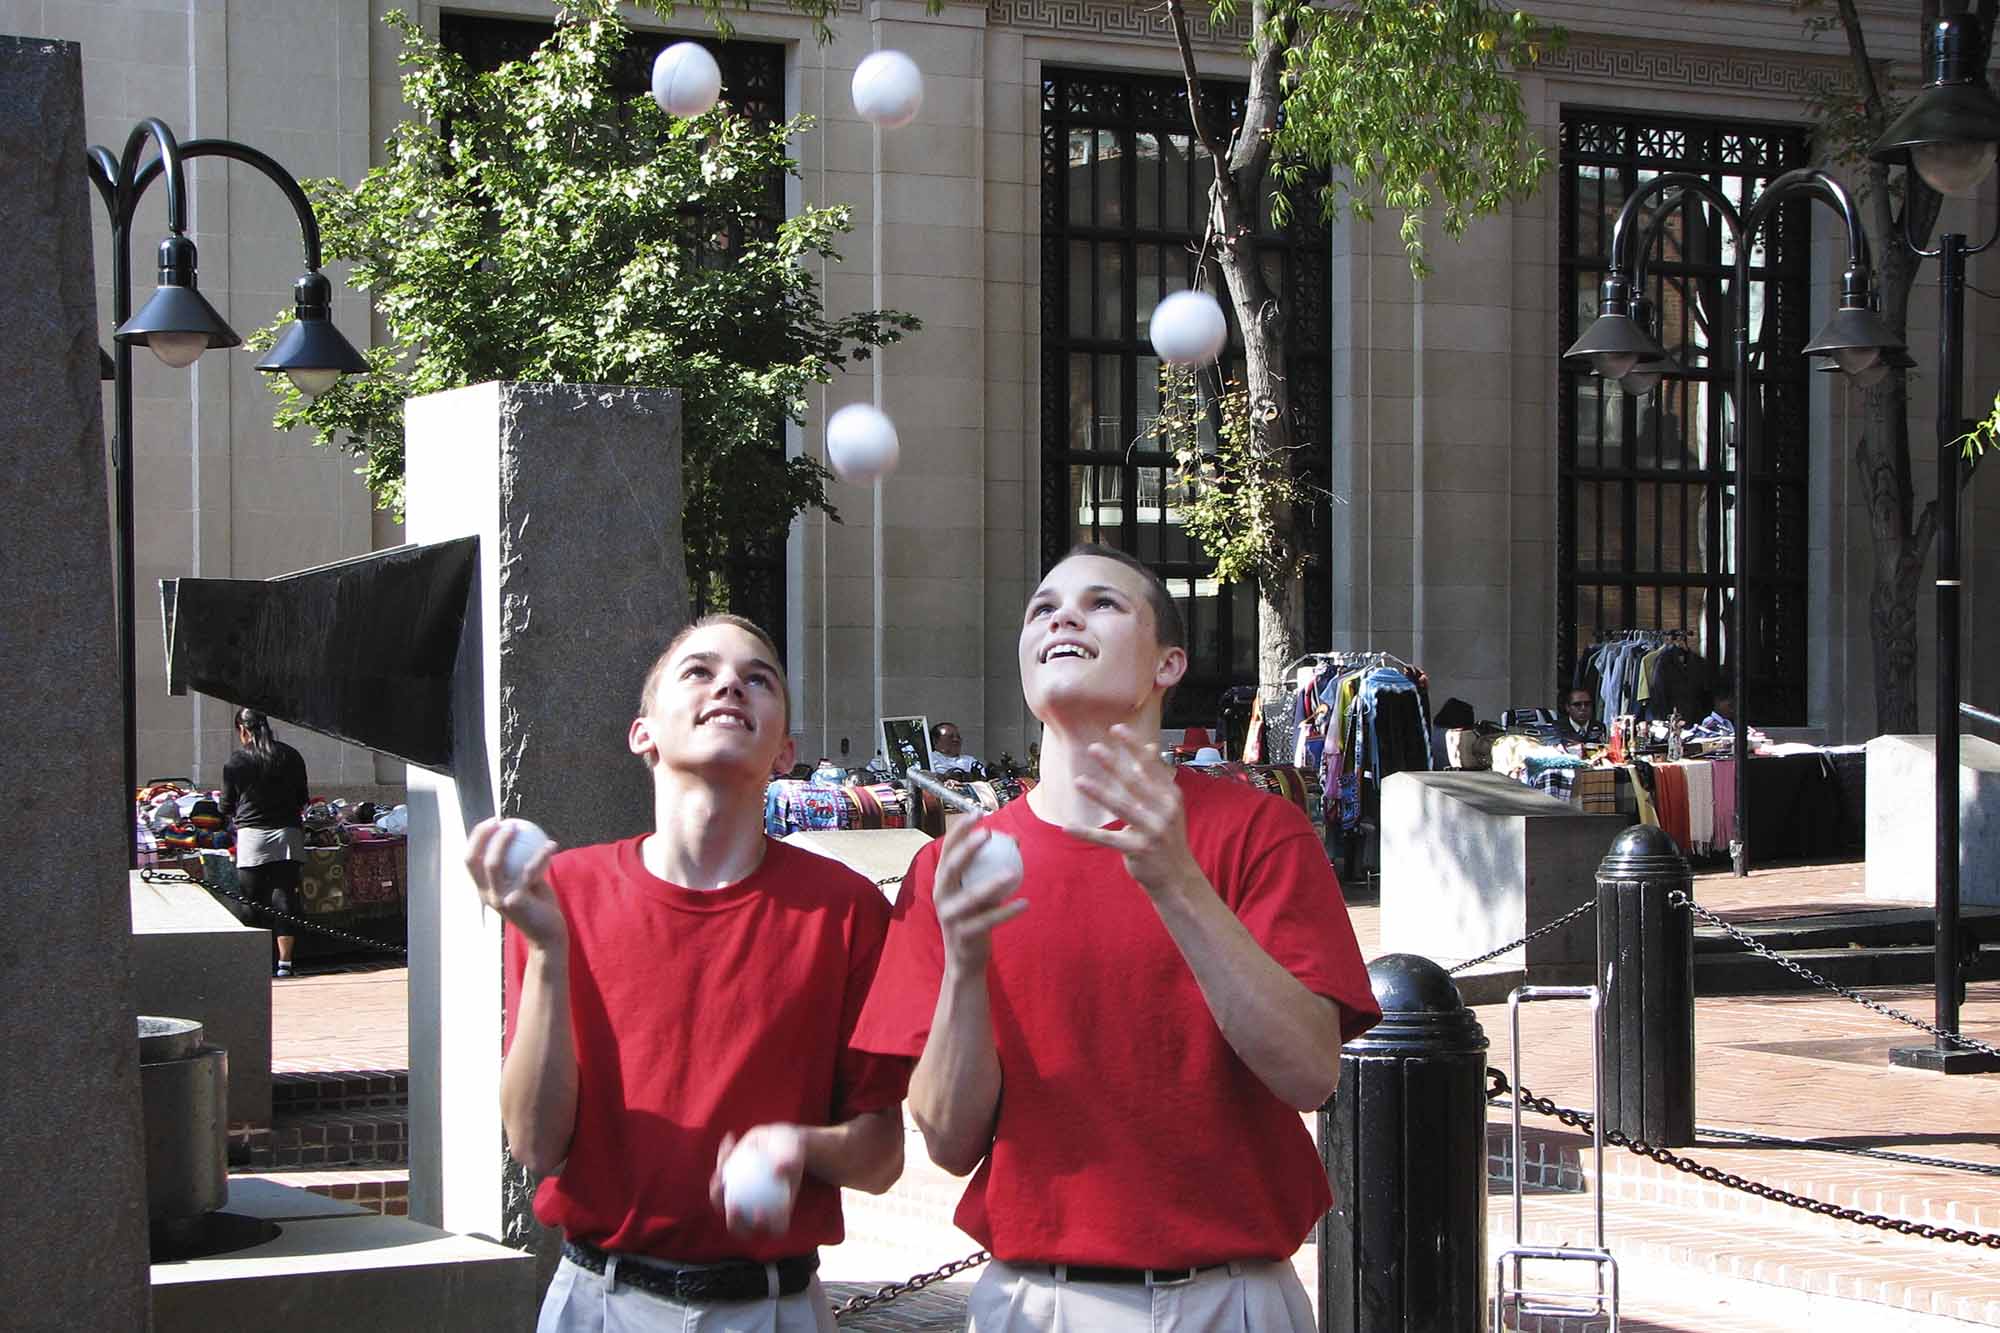 Brothers Andrew and Chris Hodge juggling on the Charlottesville downtown mall